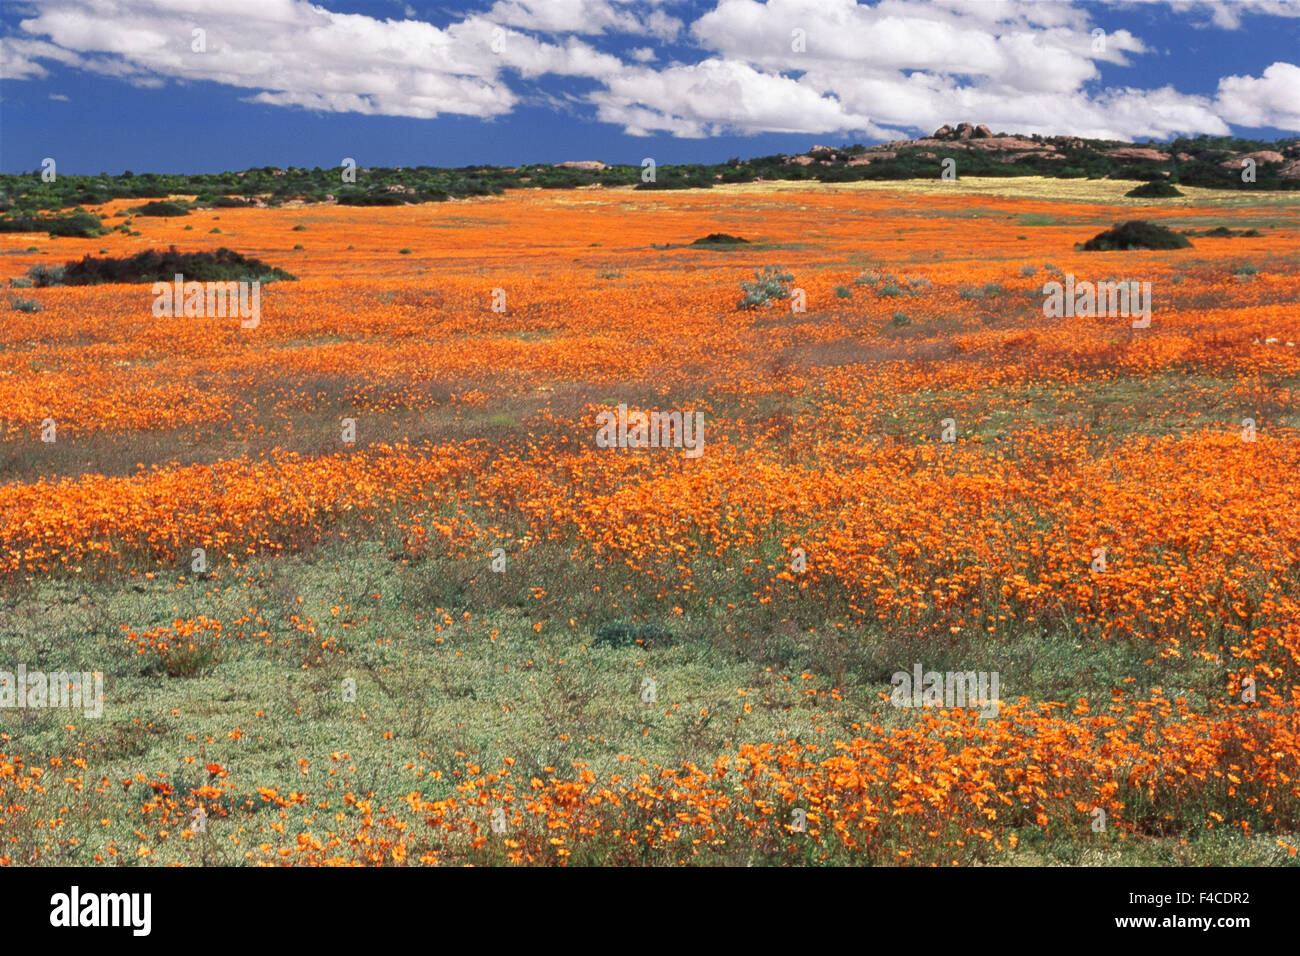 South Africa, Namaqualand, View of Dimorphotheca sinuata flower (Large format sizes available) Stock Photo